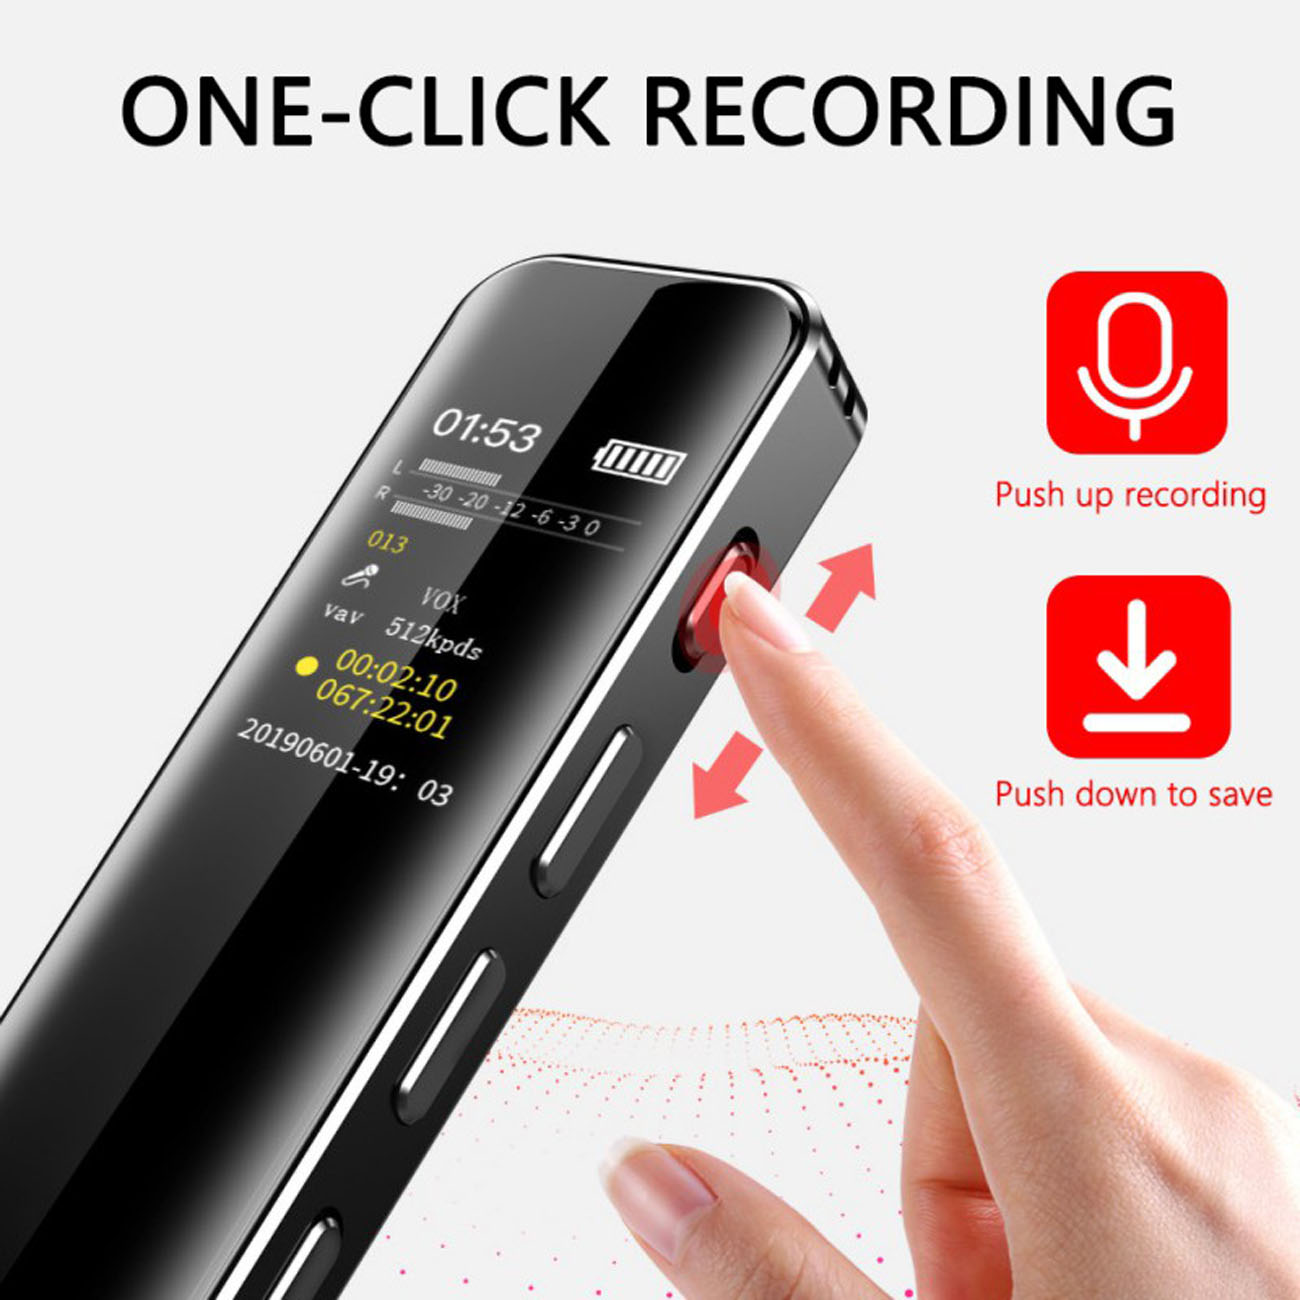 Cxfhgy Portable Professional Voice recorder 26 Languages Telephone Audio Recording For Learn Business Travelling Digital Voice Recorder